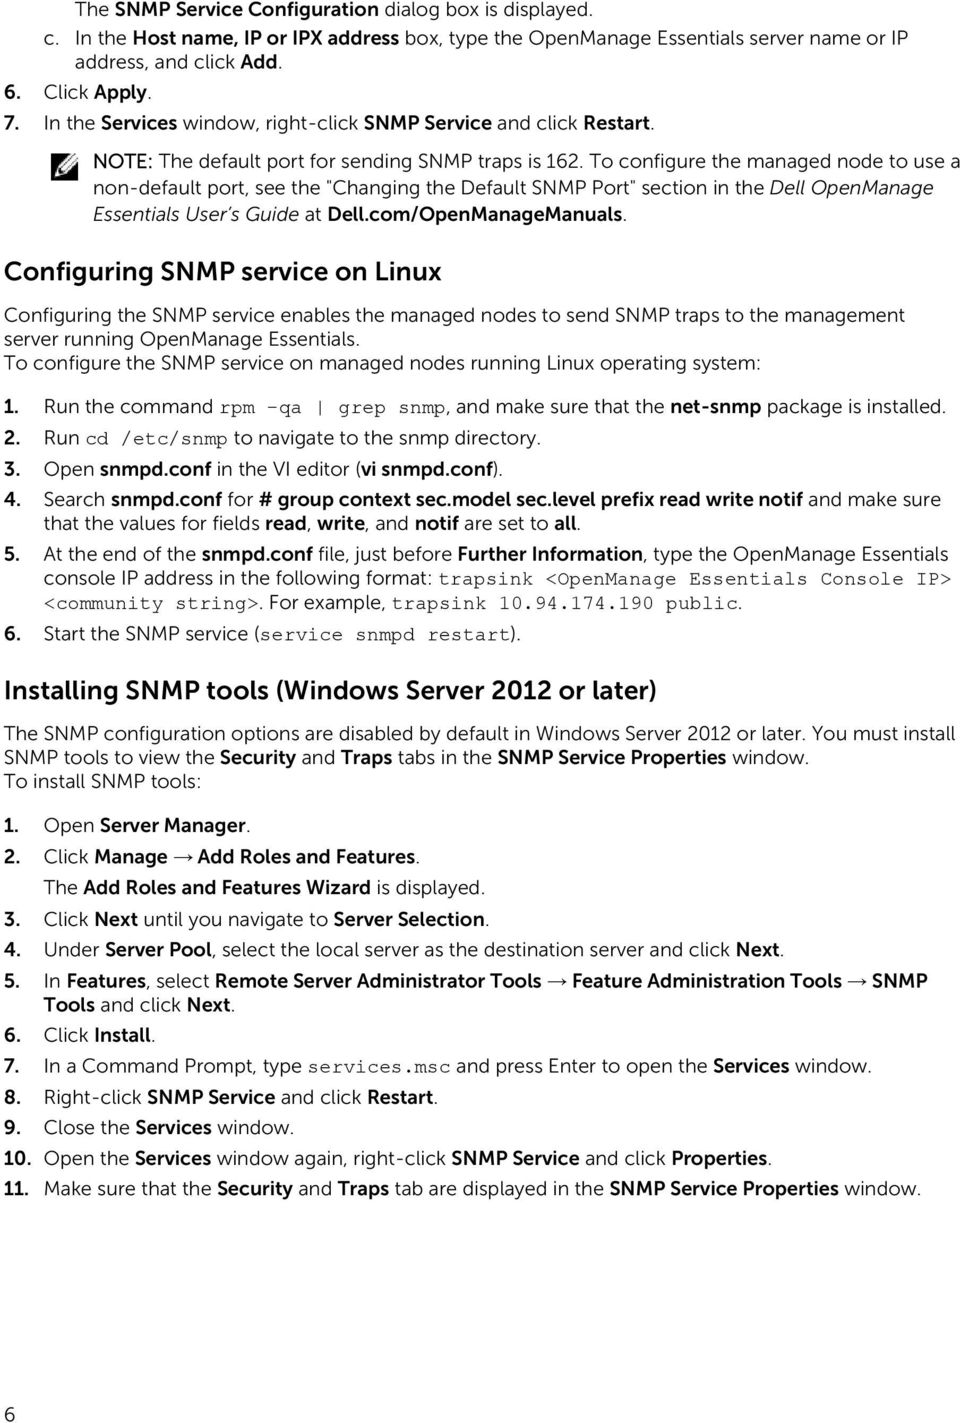 To configure the managed node to use a non-default port, see the "Changing the Default SNMP Port" section in the Dell OpenManage Essentials User s Guide at Dell.com/OpenManageManuals.